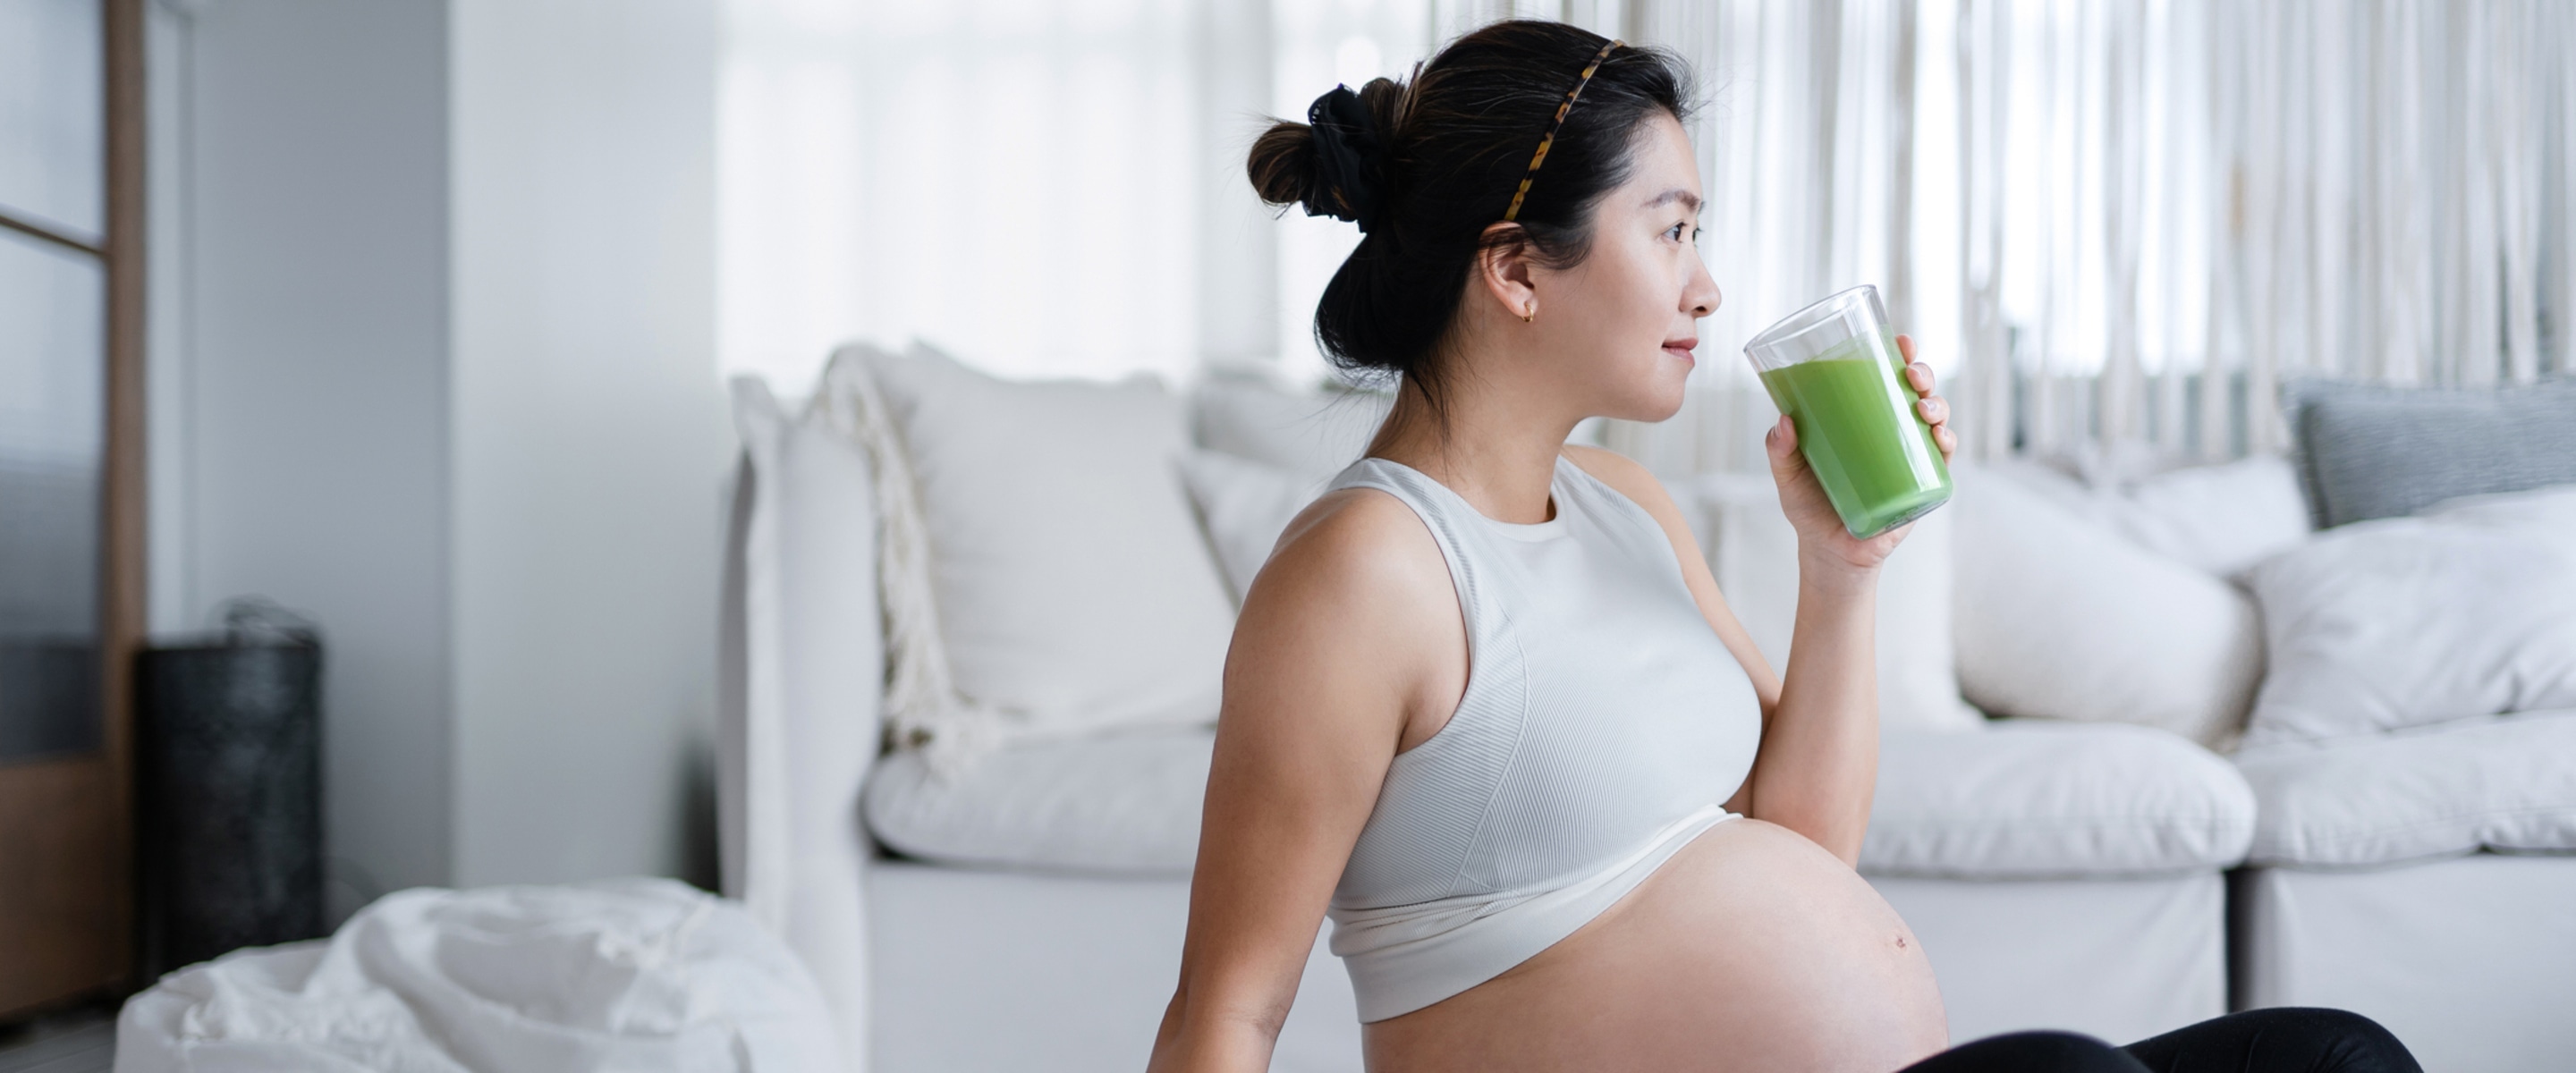 How to Have a Healthy Vegan Pregnancy, According to a Nutritionist